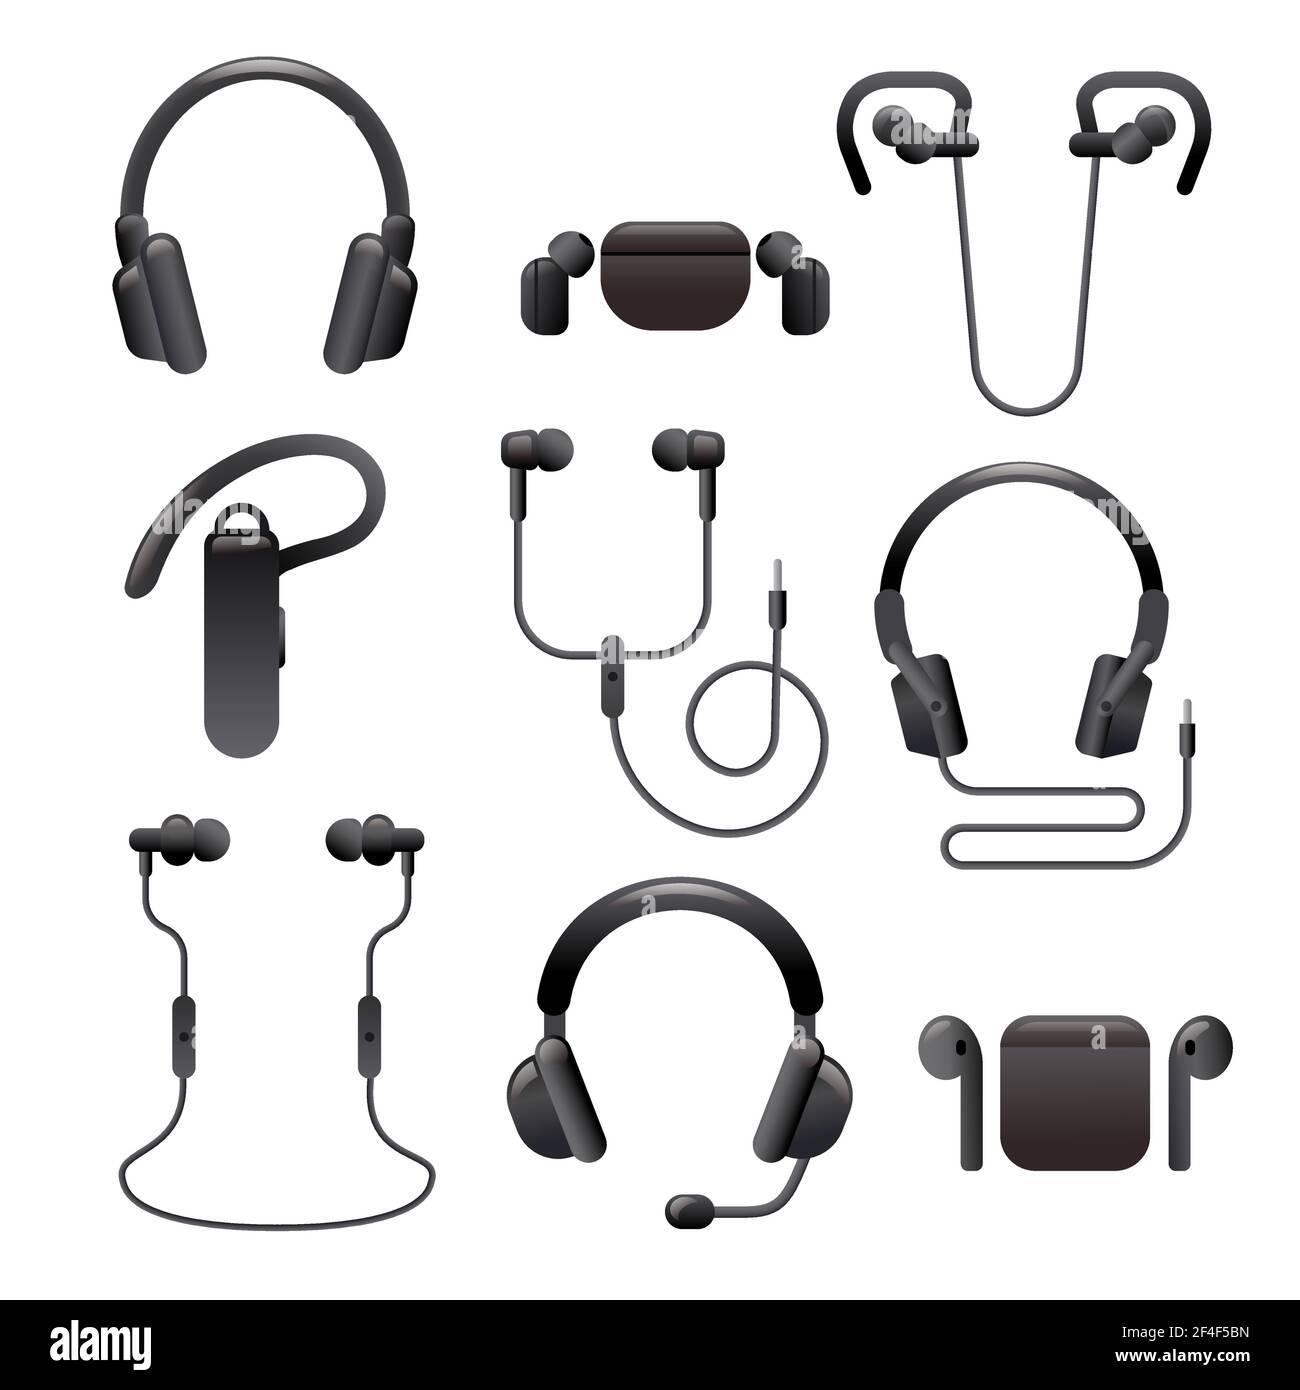 Illustration of the icon set of the different kind of earphones gadgets Stock Vector